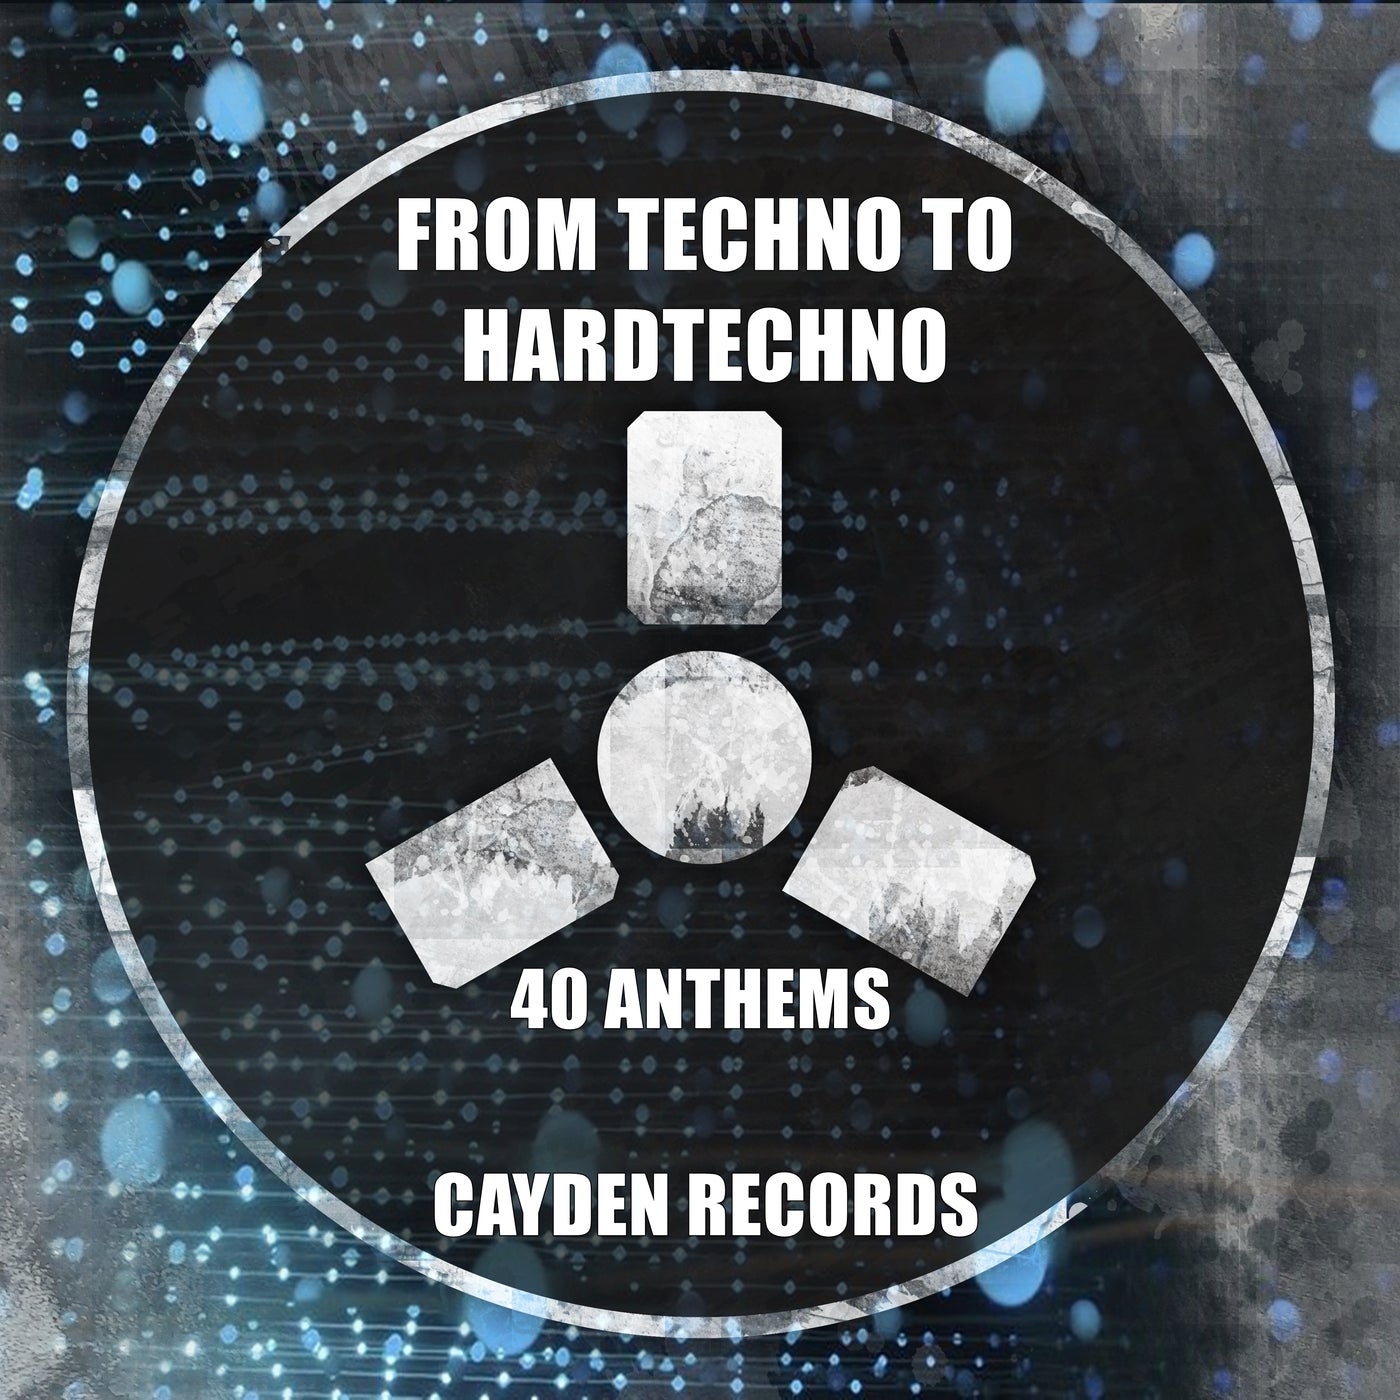 From Techno to Hardtechno - 40 Anthems